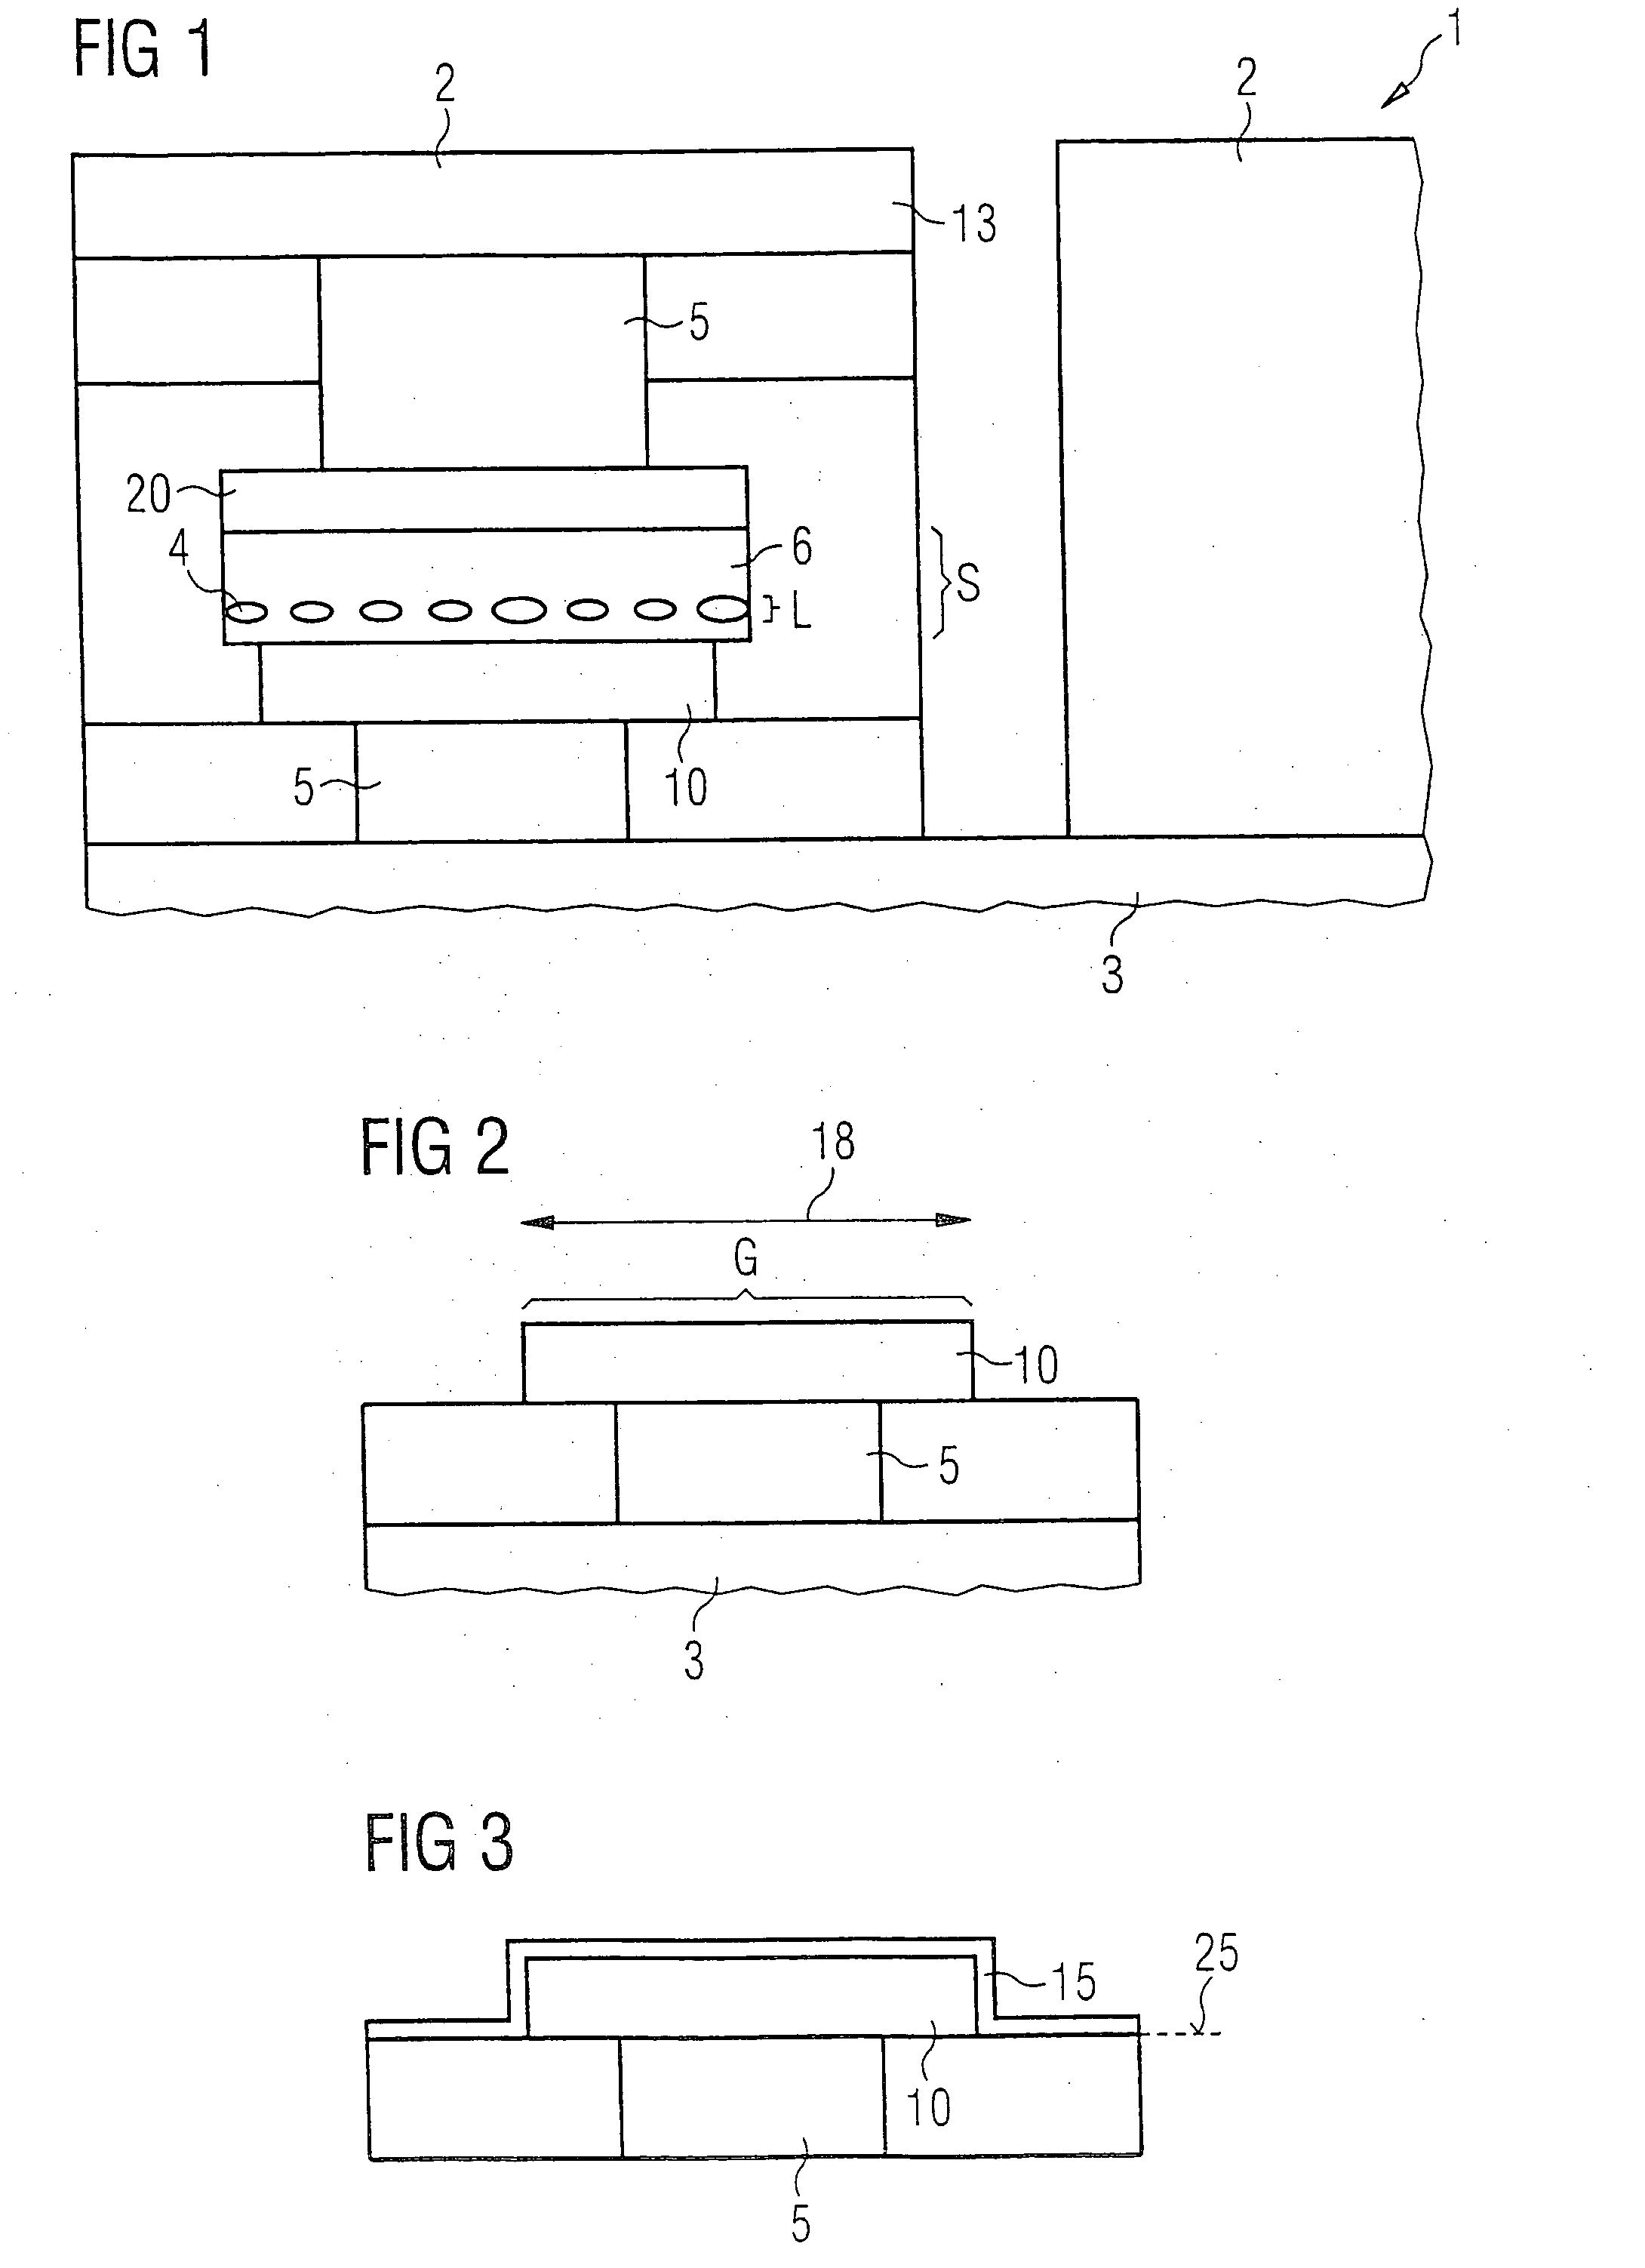 Intergrated semiconductor memory and method for producing an integrated semiconductor memory